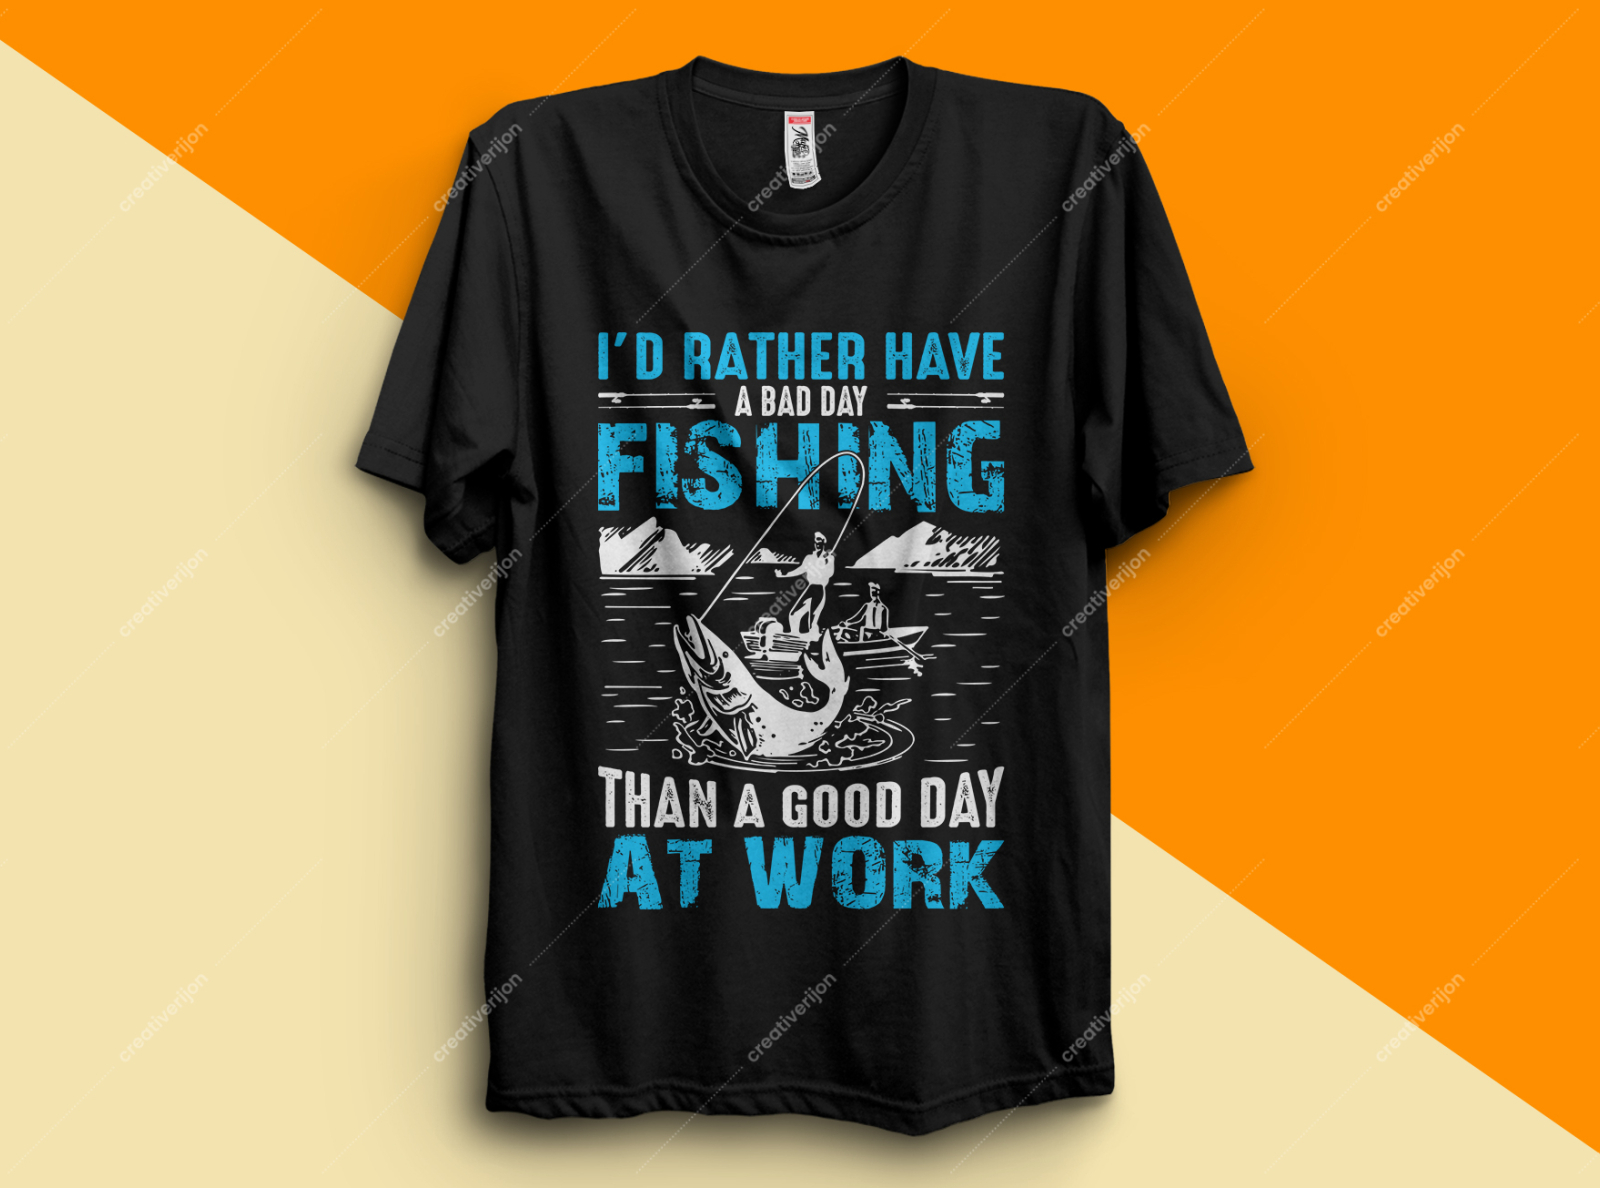 A Bad Day Fishing Is Better Than A Good Day At Work Funny Fishing Shirts  and Hoodies